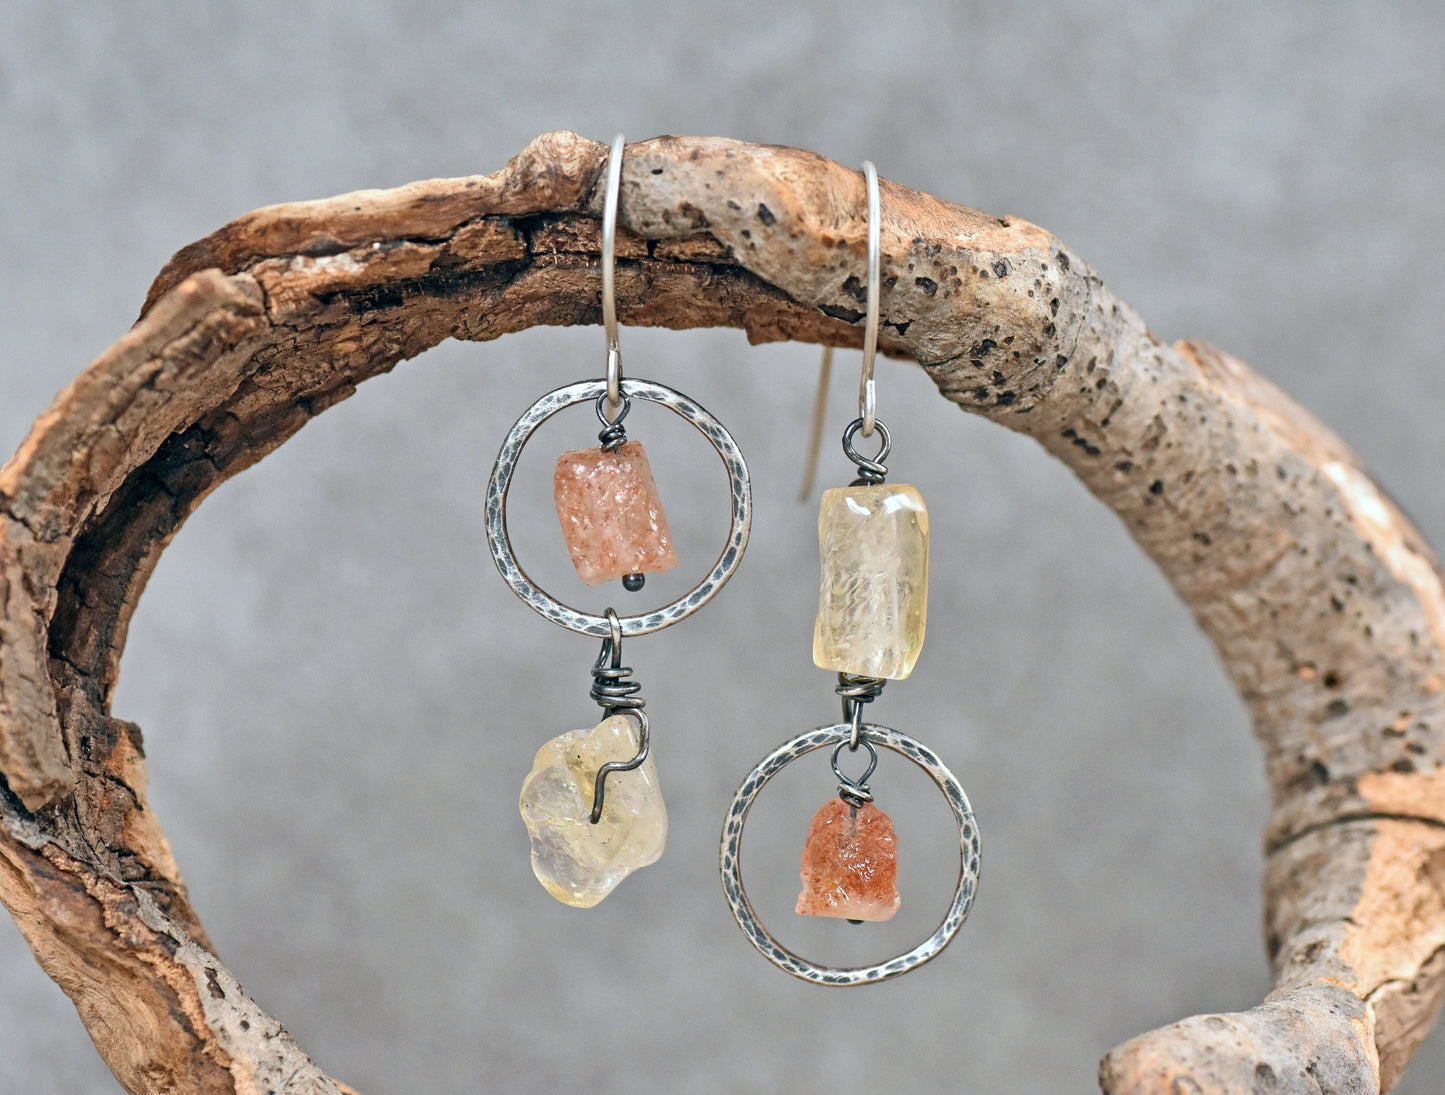 Asymmetrical Sterling Silver Earrings, Citrine and Raw Sunstone Jewelry, Yellow Orange Gemstone Dangles, Rustic Circle Wire, Artisan Unique